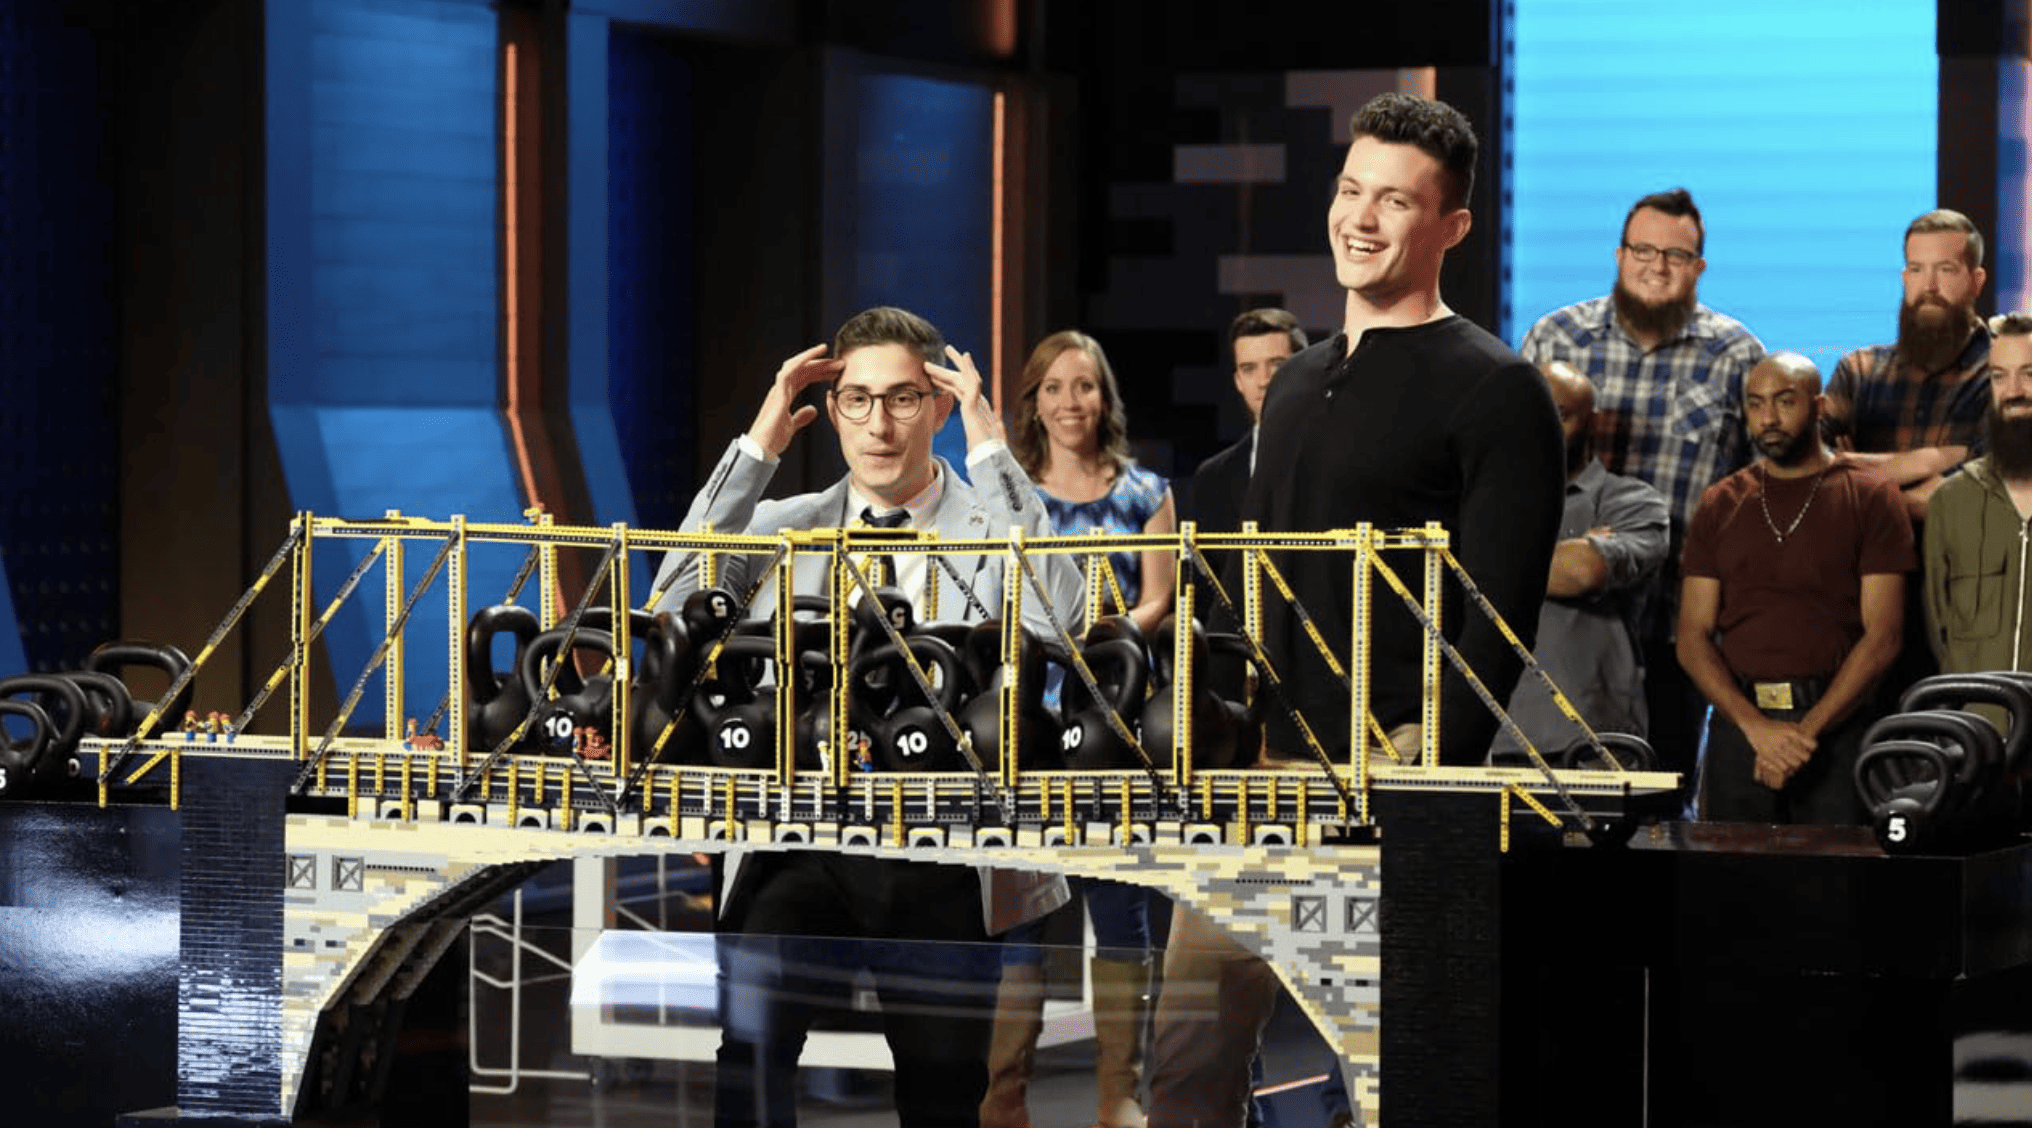 A Lego-built bridge carries the weight of many kettlebells as contestants look on in this image from Endemol Shine North America. 